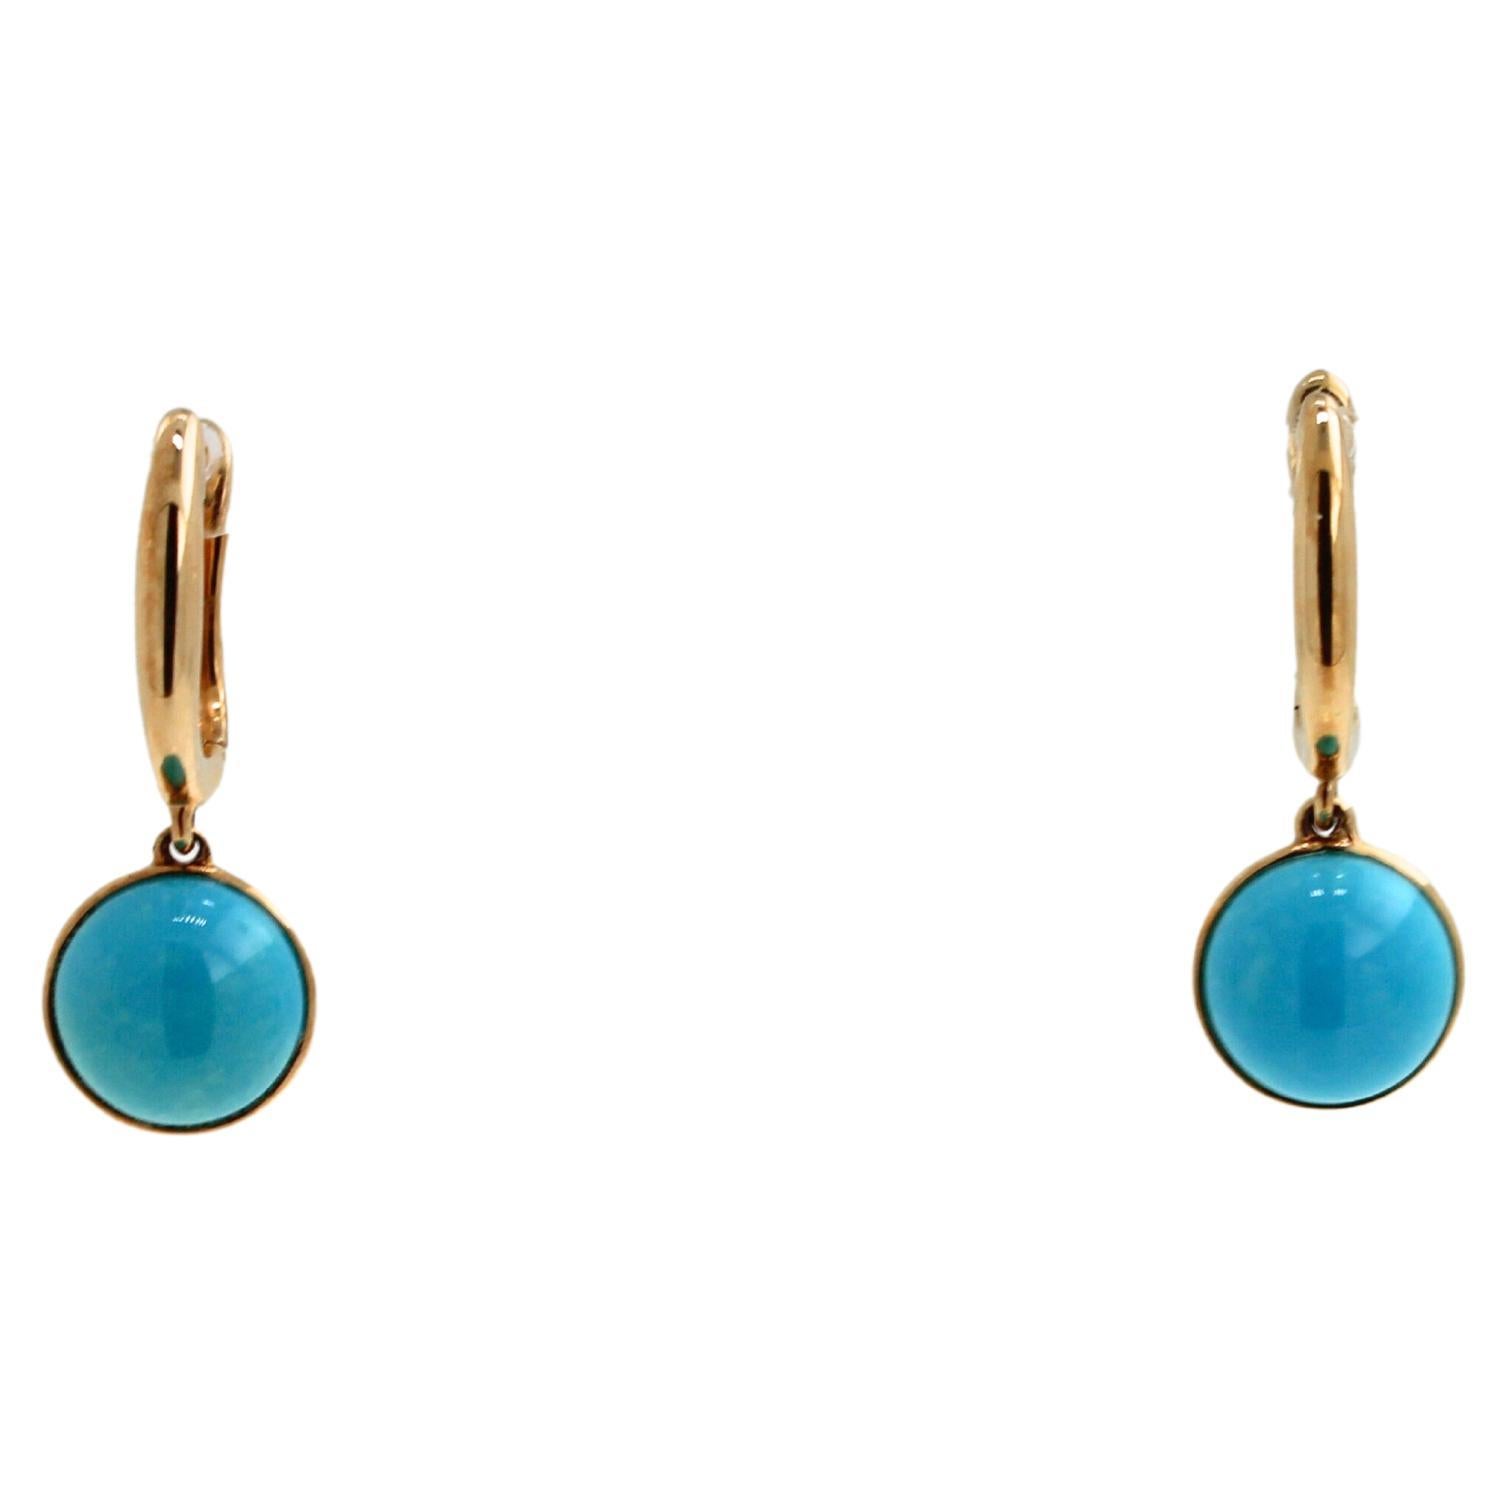 14K Yellow Gold
2.00 cts Turquoise